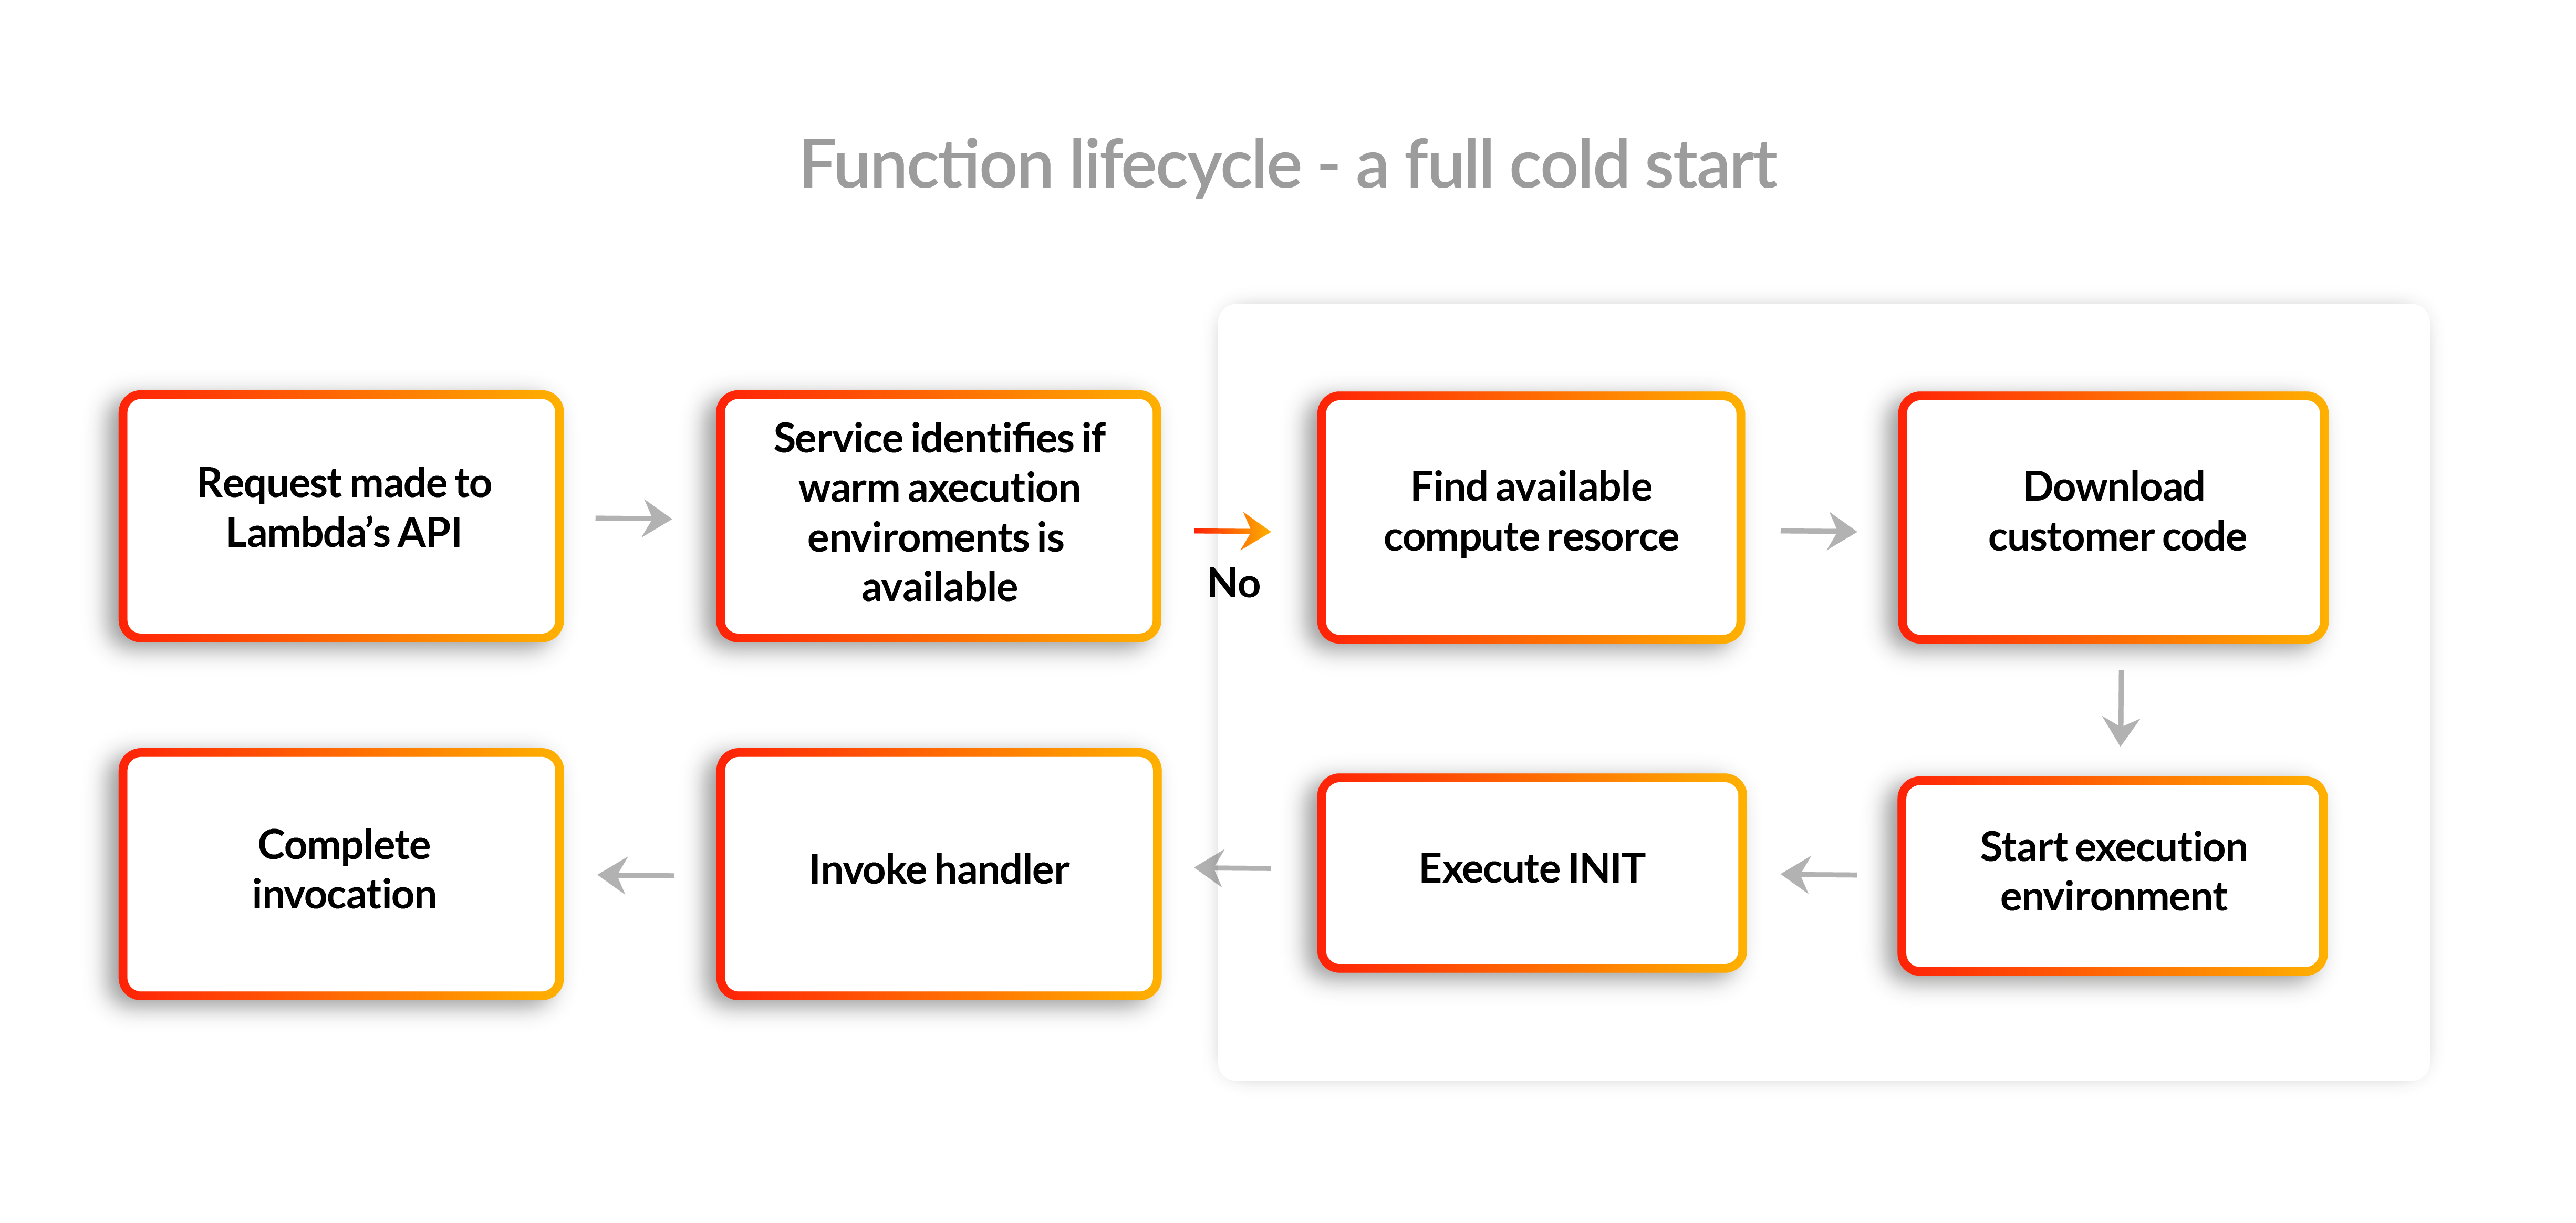 Function lifecycle - a full cold start